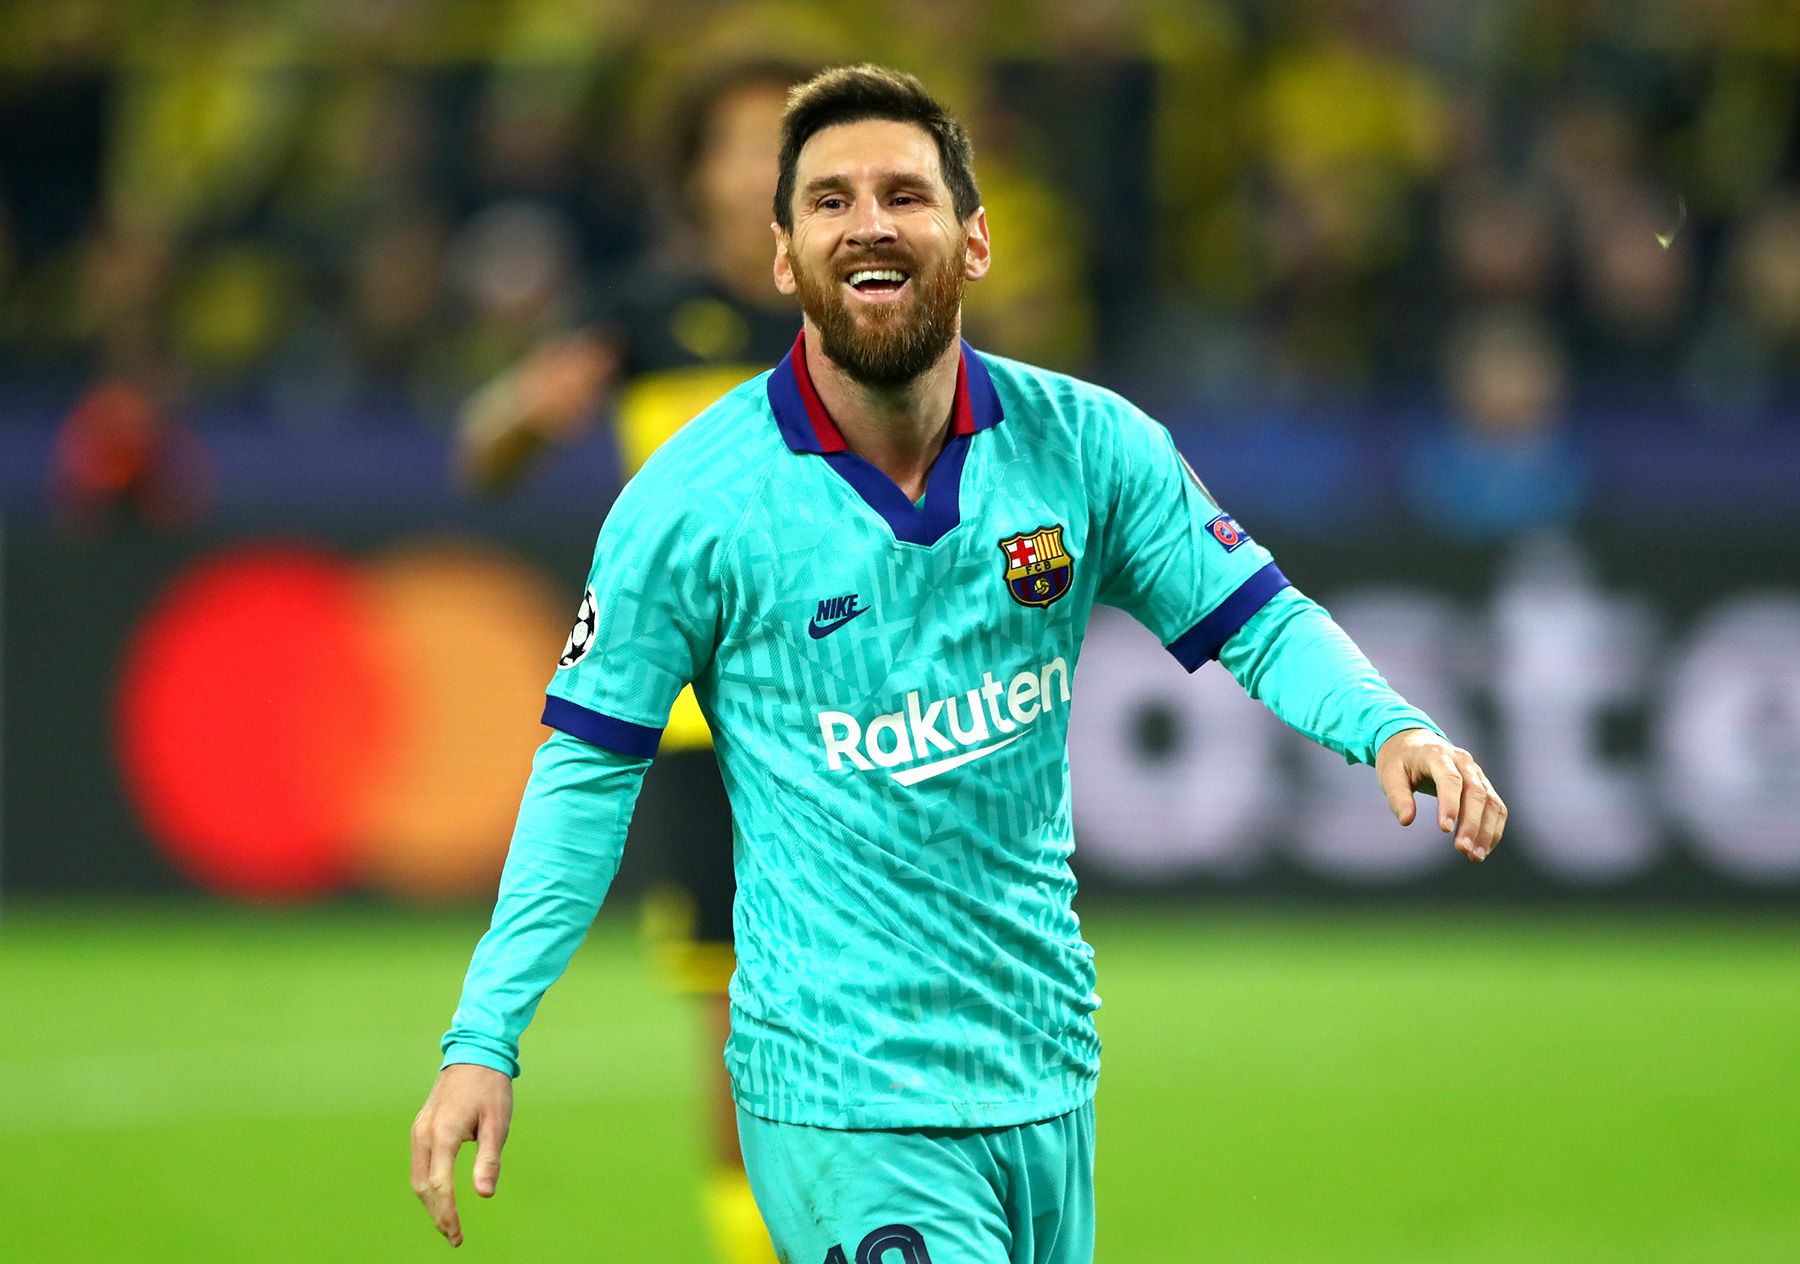 Leo Messi went back to play with the Barça in Dortmund